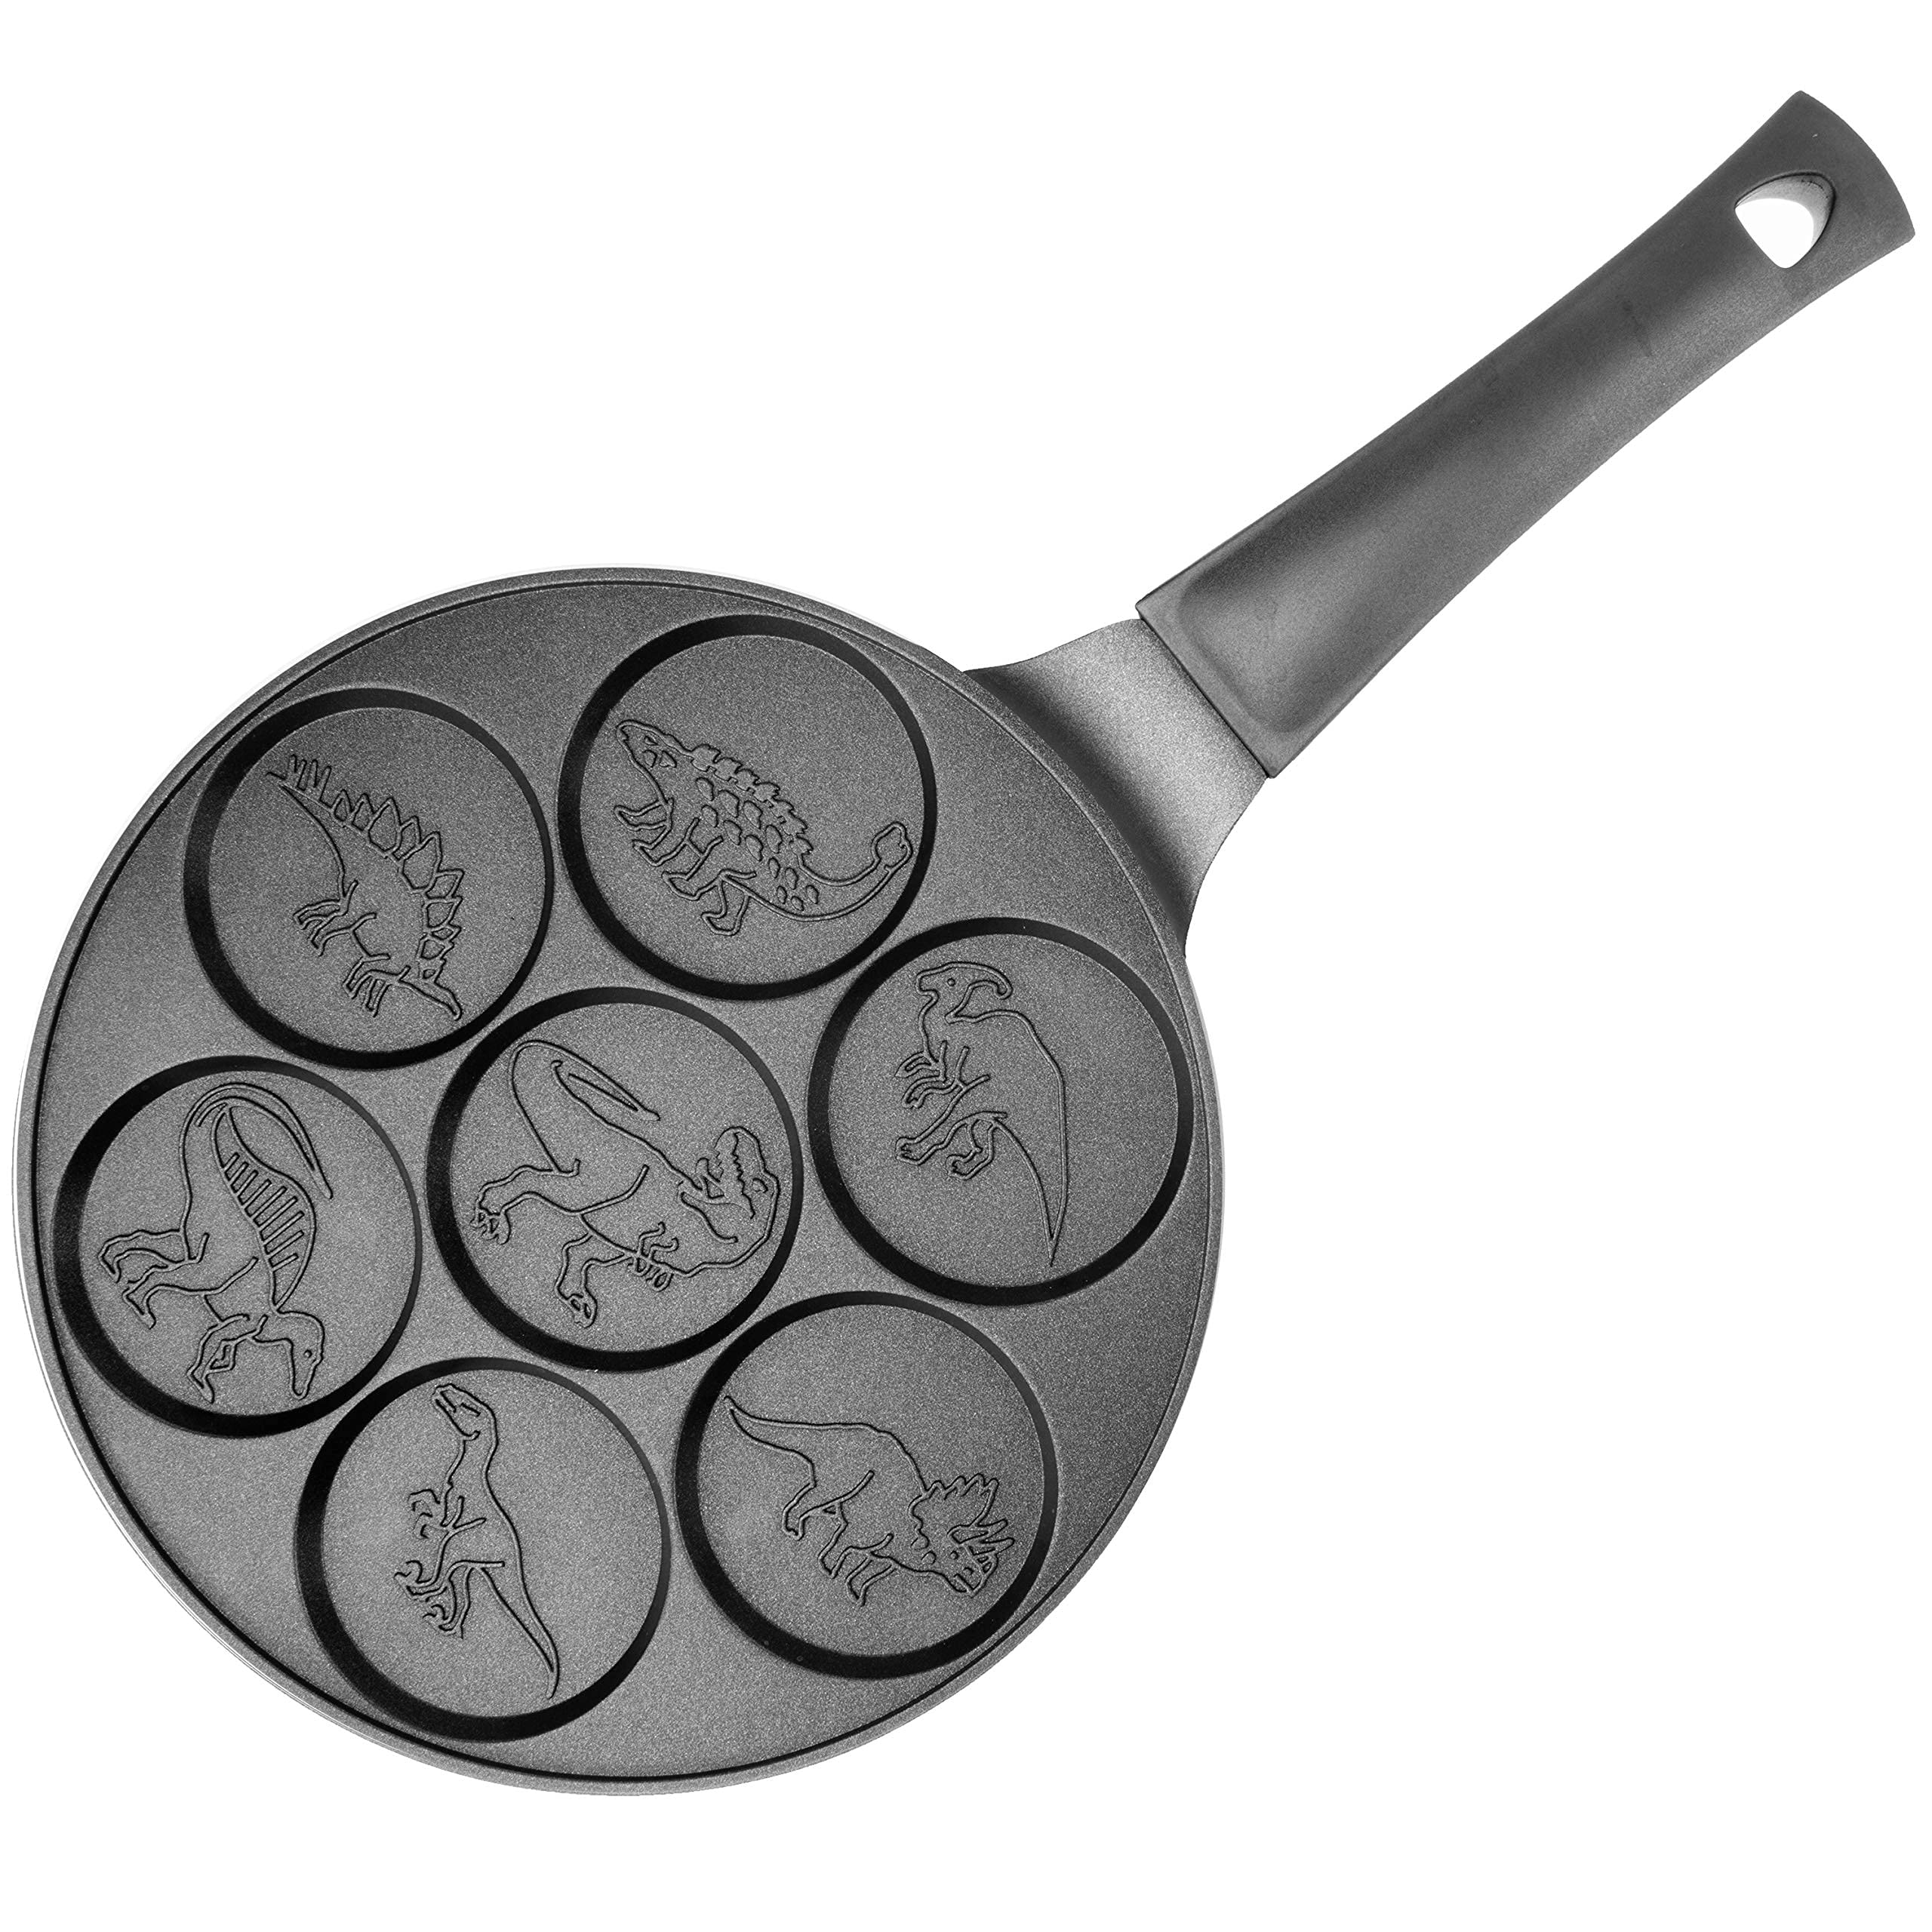 Dino Mini Pancake Pan - Make 7 Unique Flapjack Dinosaurs, Nonstick Pan Cake Maker Griddle for Jurassic Fun & Easy Cleanup, Great for Family Holiday Breakfast or Gift for Kids and Adults